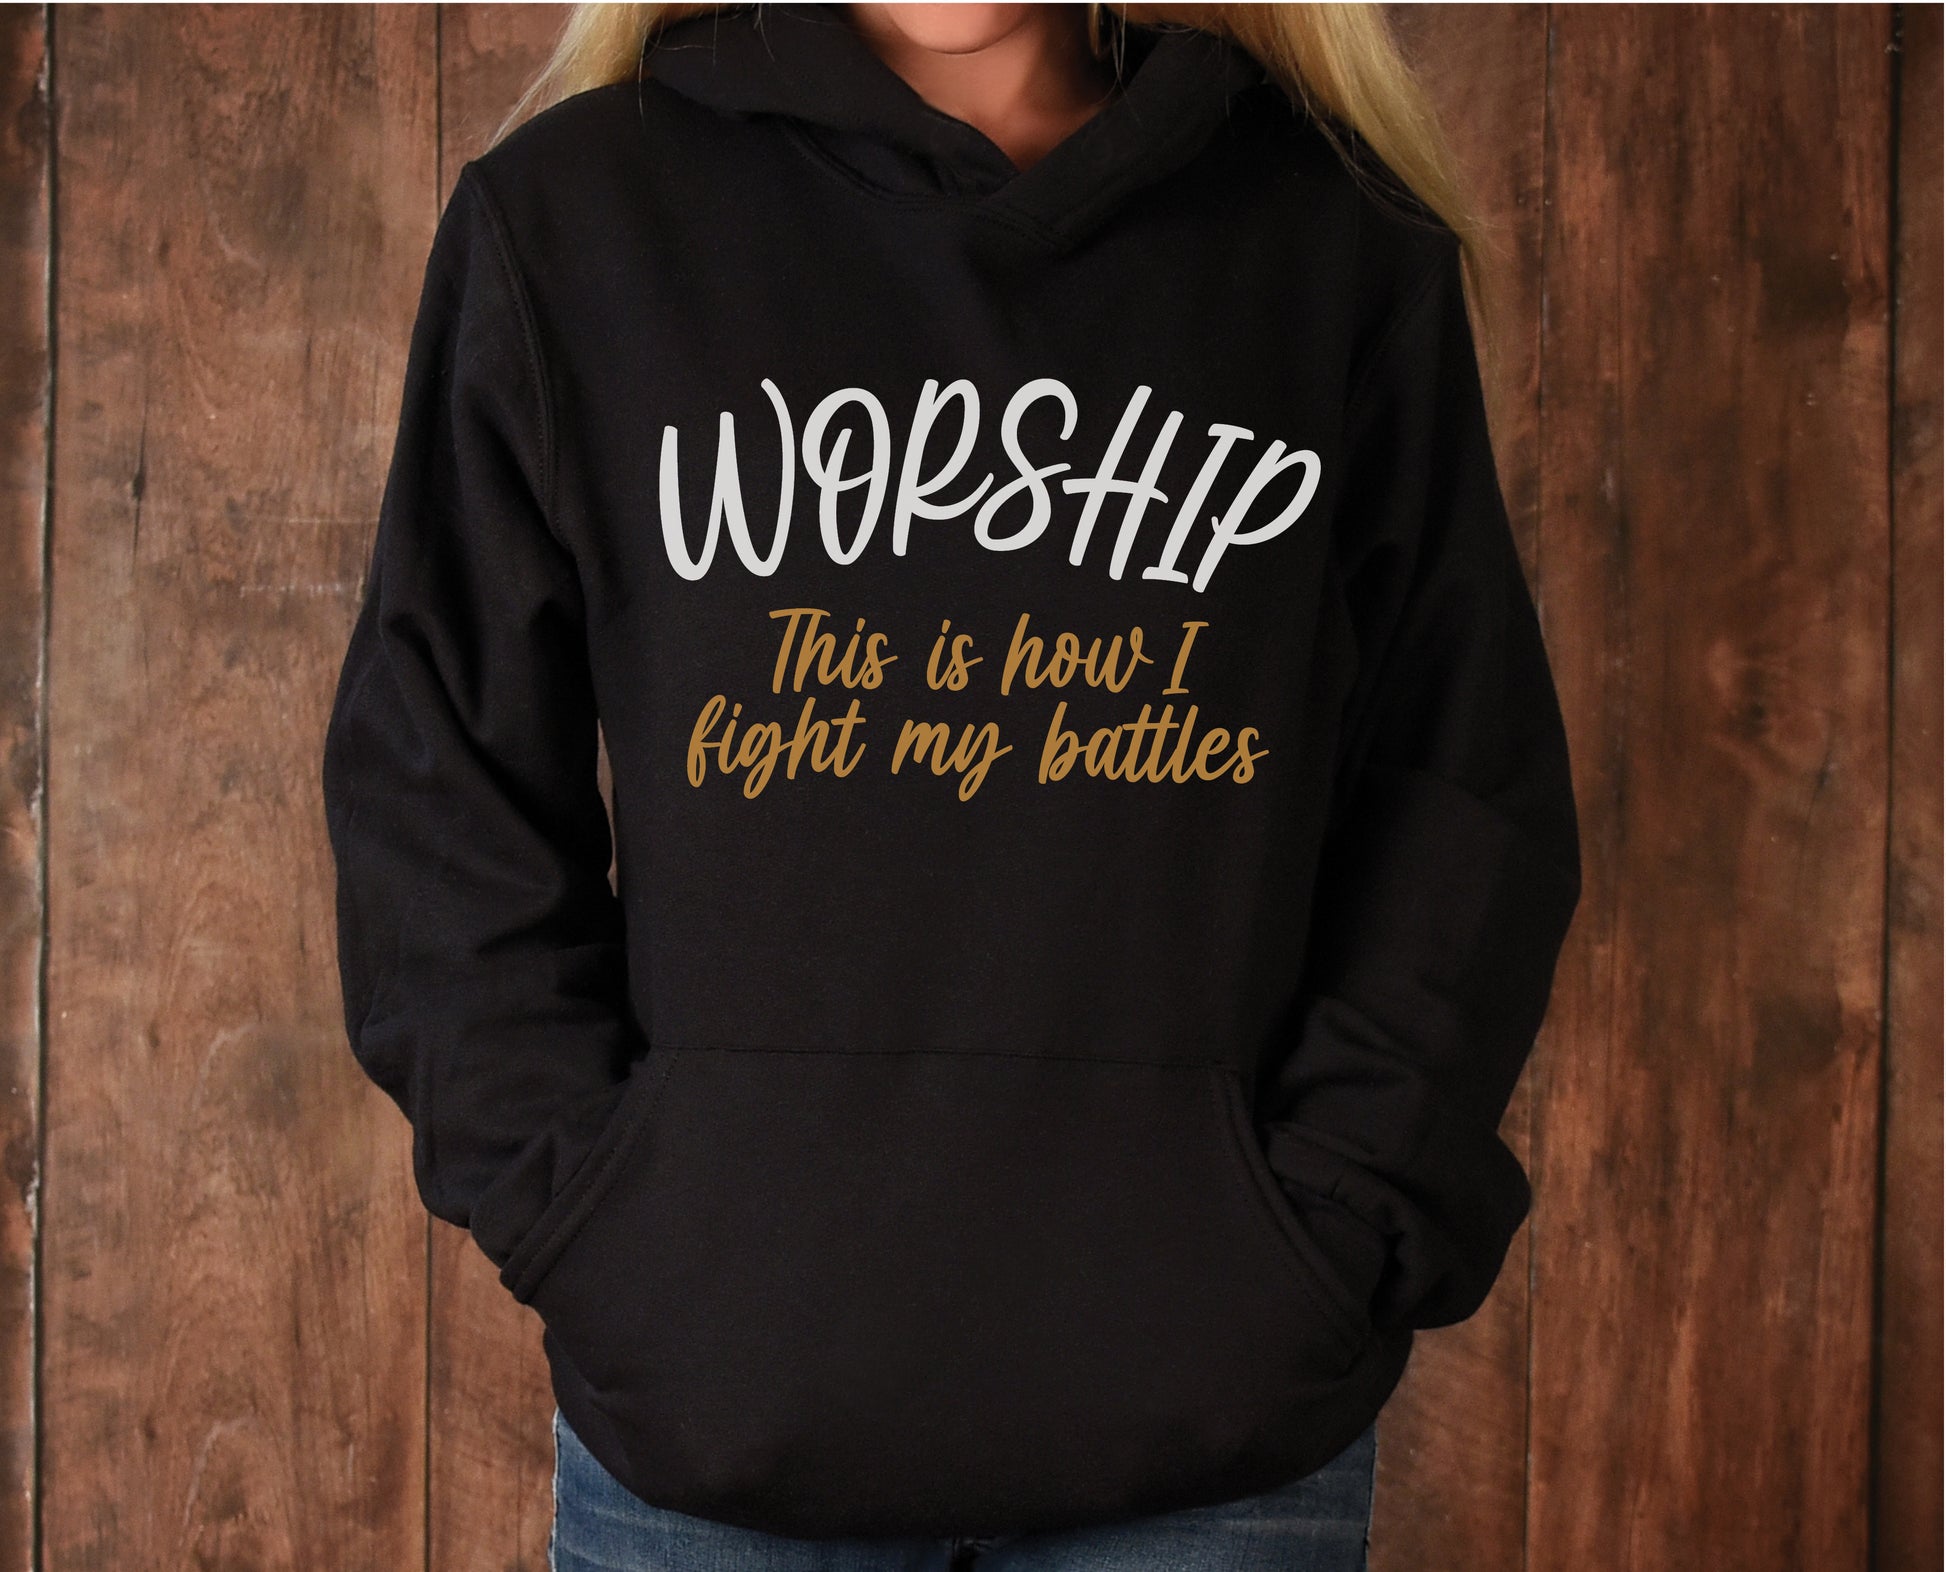 Worship This Is How I Fight My Battles Christian aesthetic design printed in white and gold on cozy soft black unisex hoodie for women and men, great gift for worship leaders